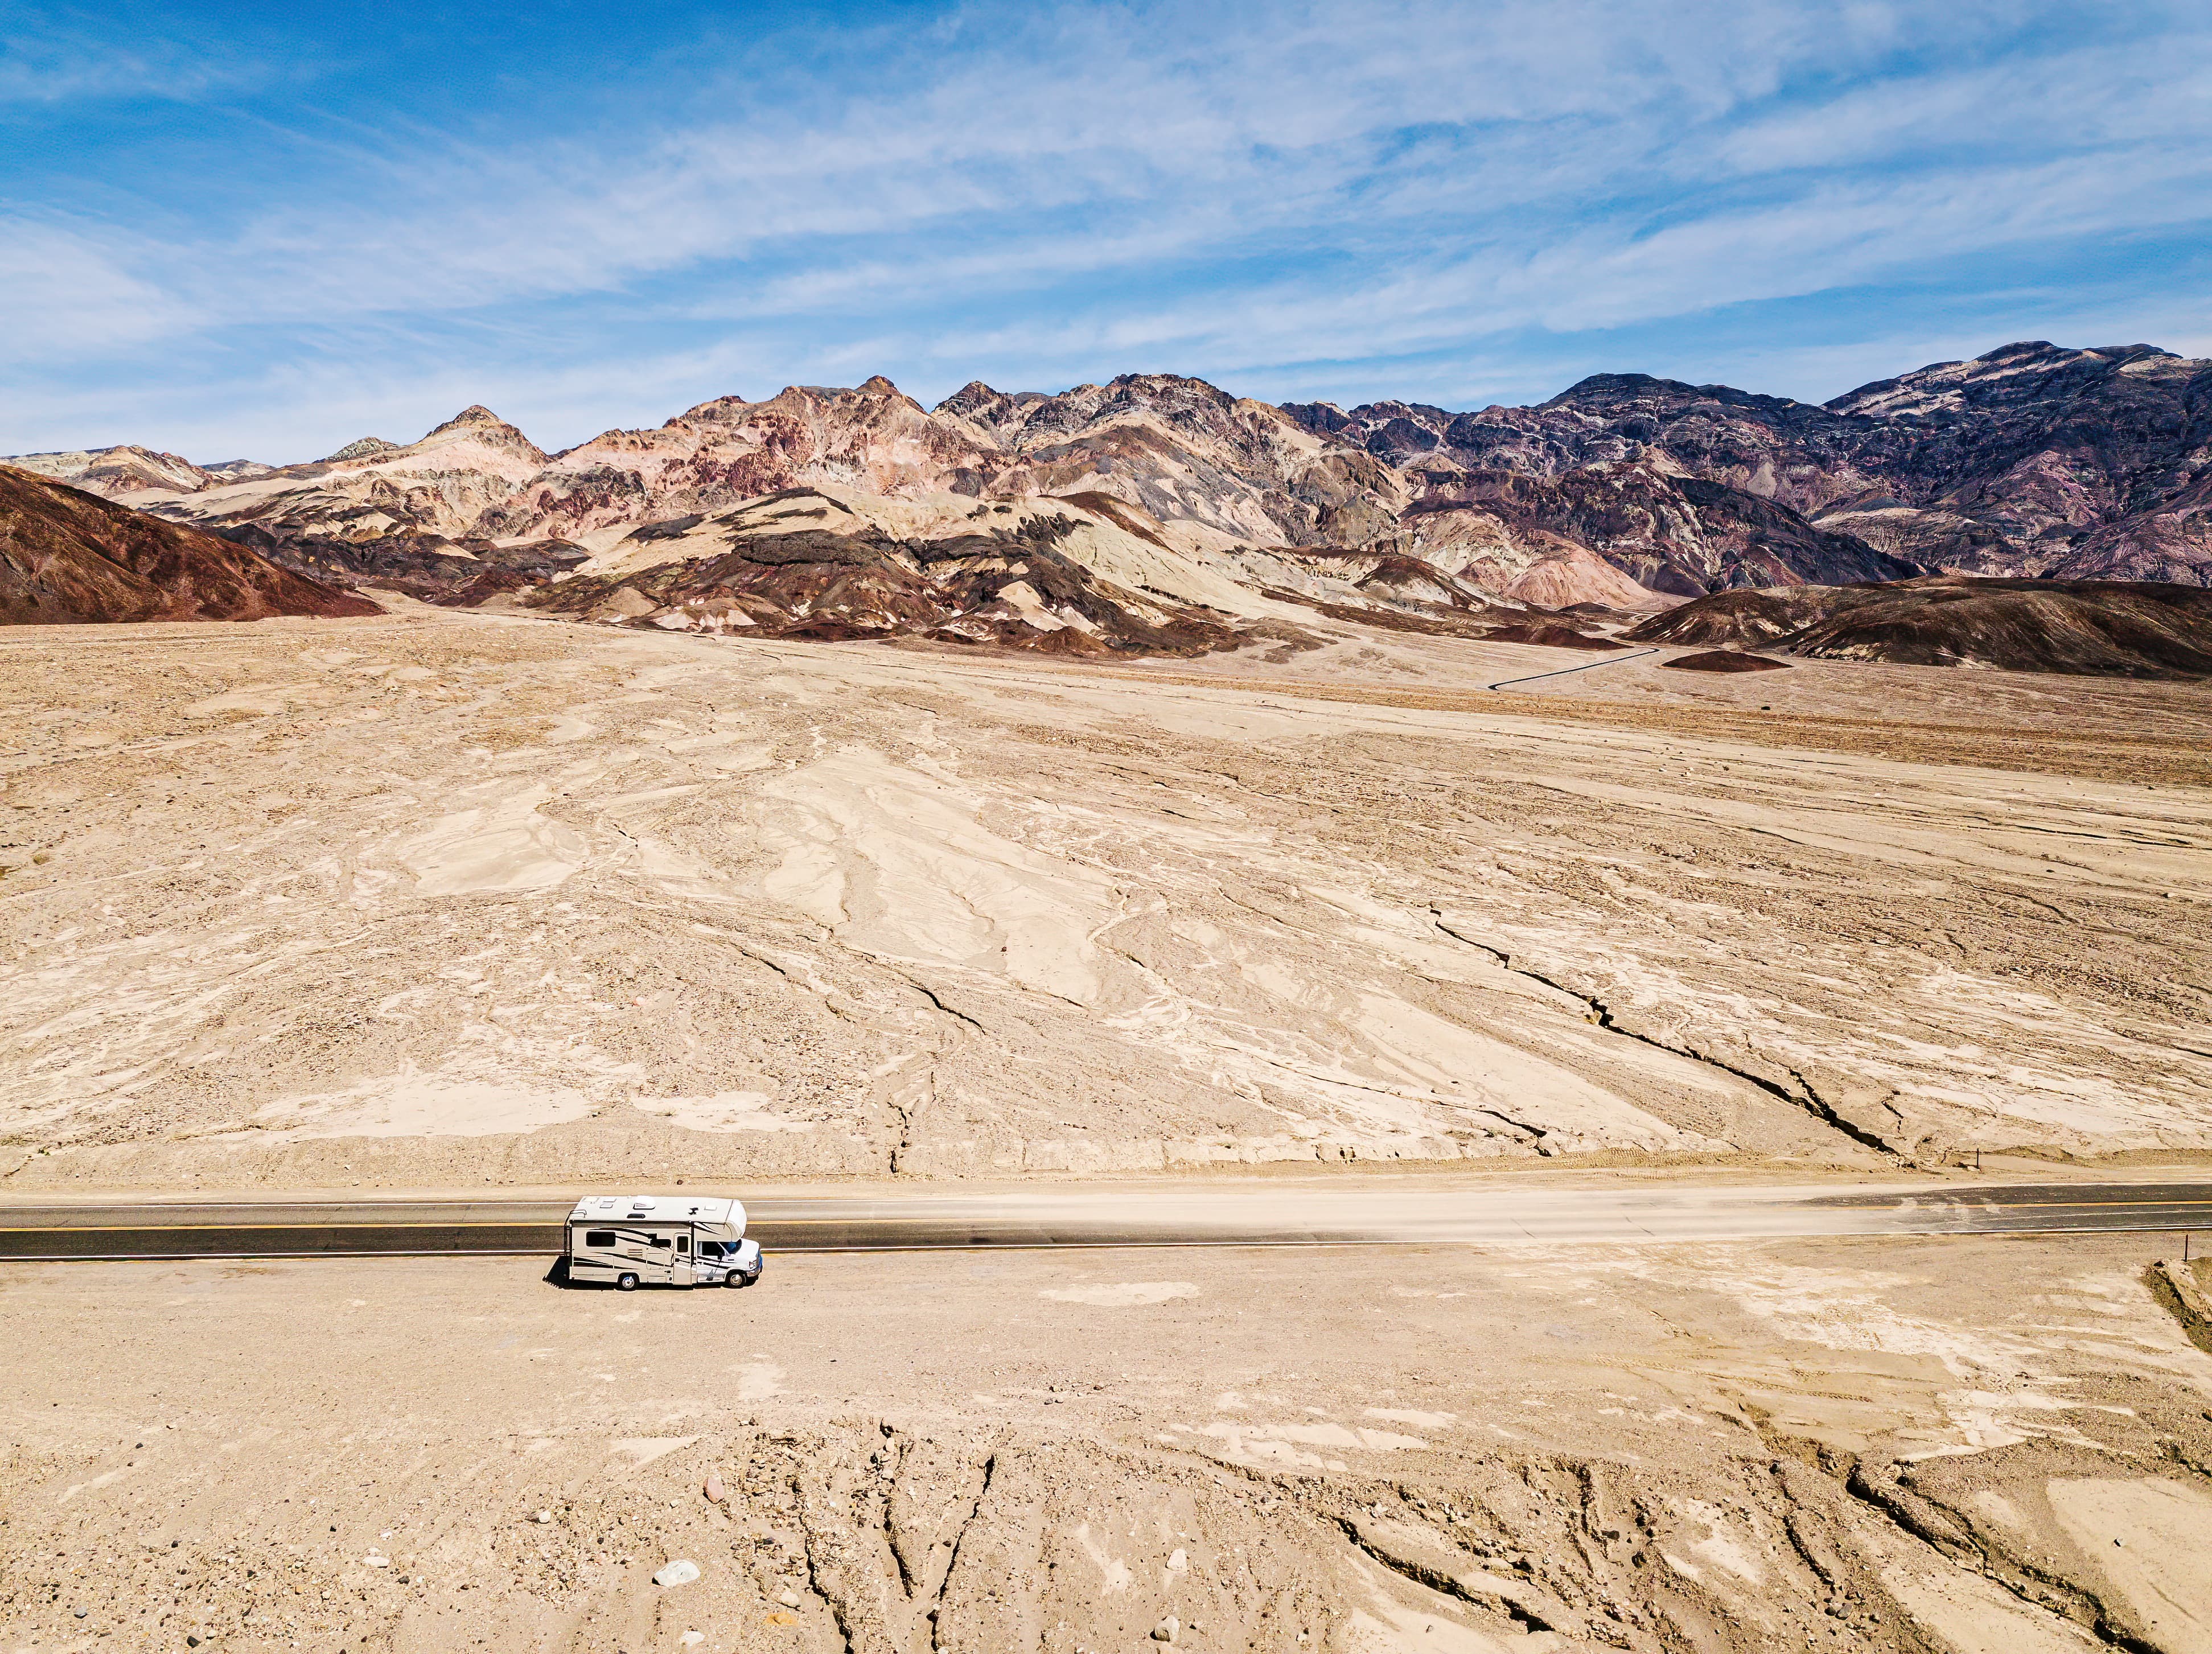 A moving caravan at Death Valley National Park in California